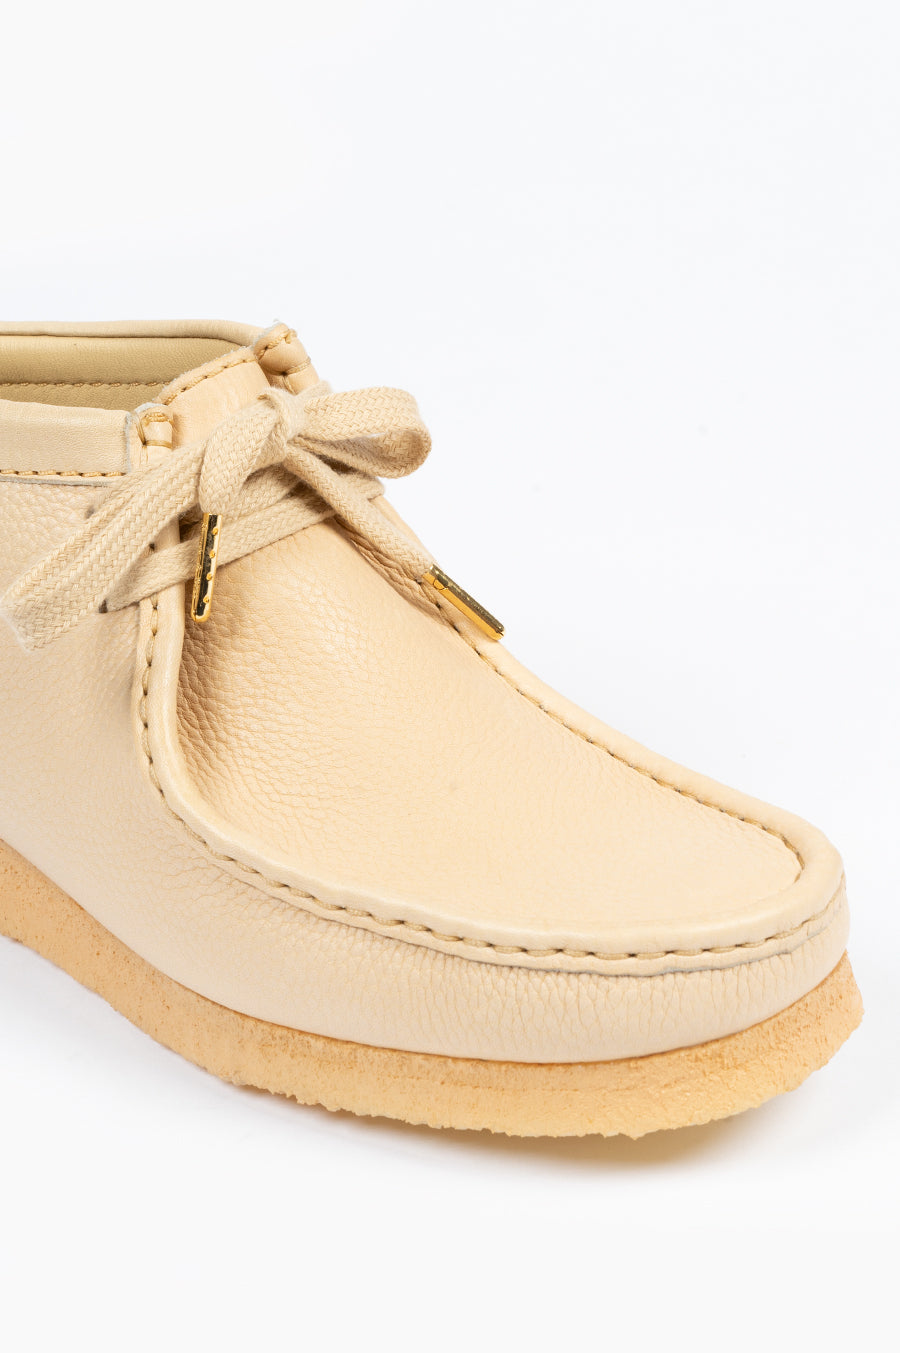 matematiker Sanktion dominere CLARKS X SPORTY & RICH WALLABEE BOOT CREAM PUFF LEATHER – BLENDS